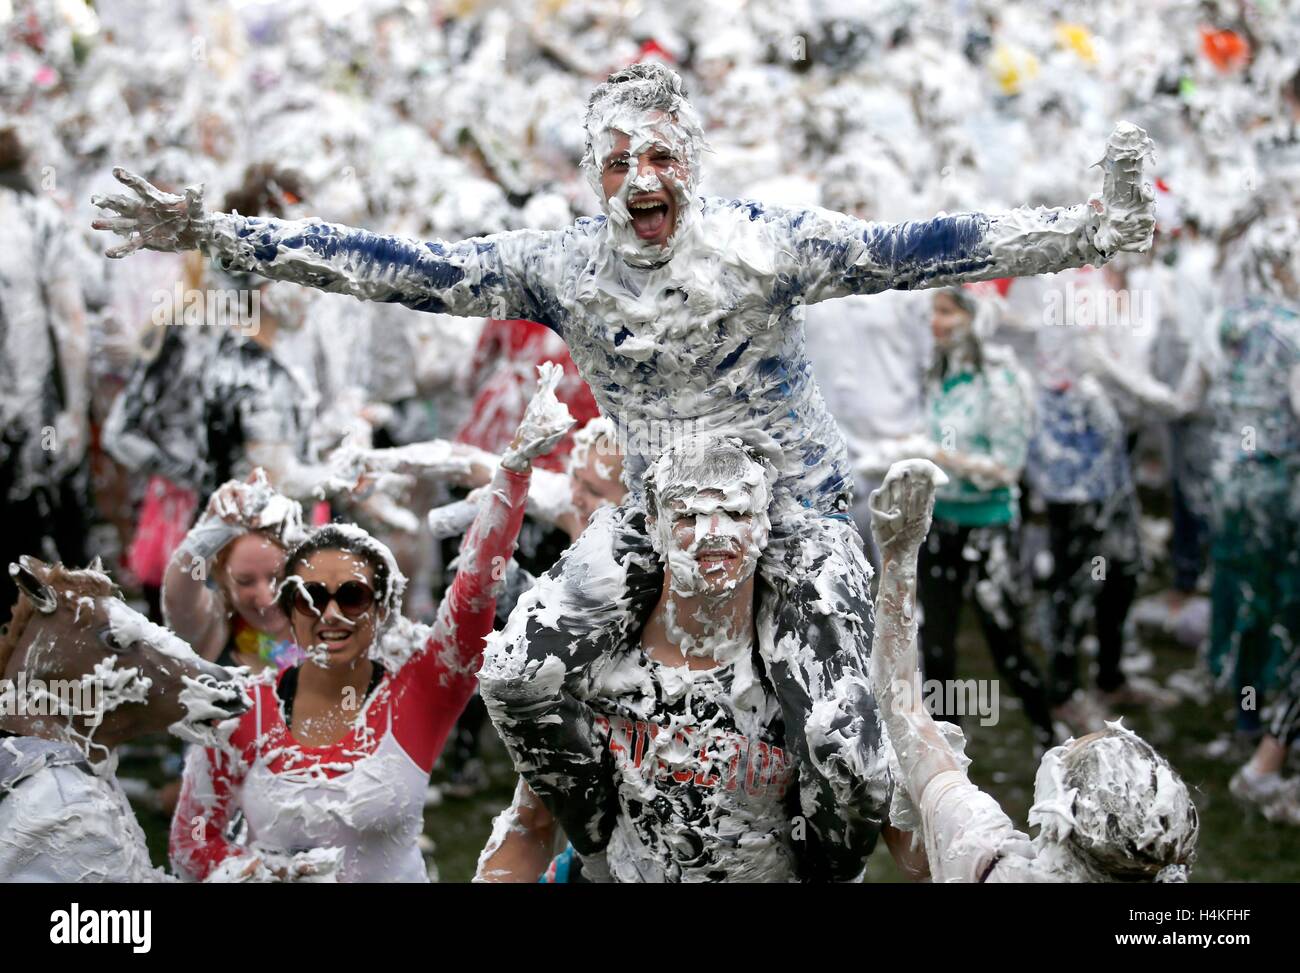 St Andrews University students take part in a foam fight known as Raisin Monday in the Lower College Lawn behind St Salvator's Quadrangle following the Raisin Weekend, an annual tradition where student 'parents' inflict tasks on the unfortunate first-years they have adopted as 'children' as part of a mentoring scheme. Stock Photo